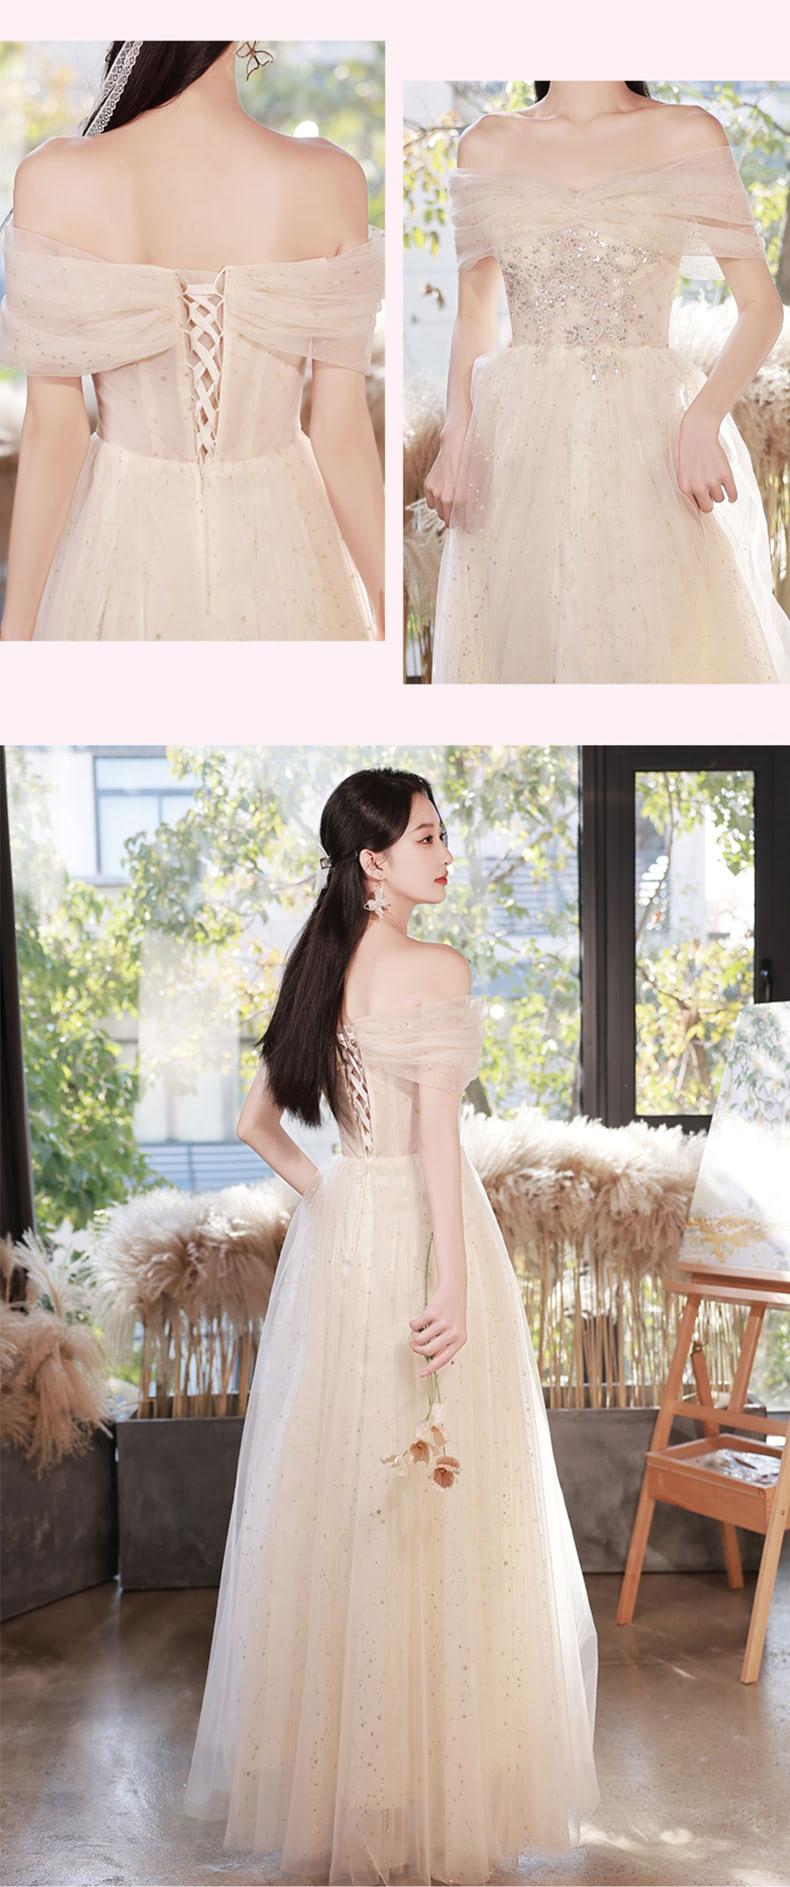 A-Line-Champagne-Sweet-Floral-Lace-Bridesmaid-Maxi-Evening-Dress23.jpg